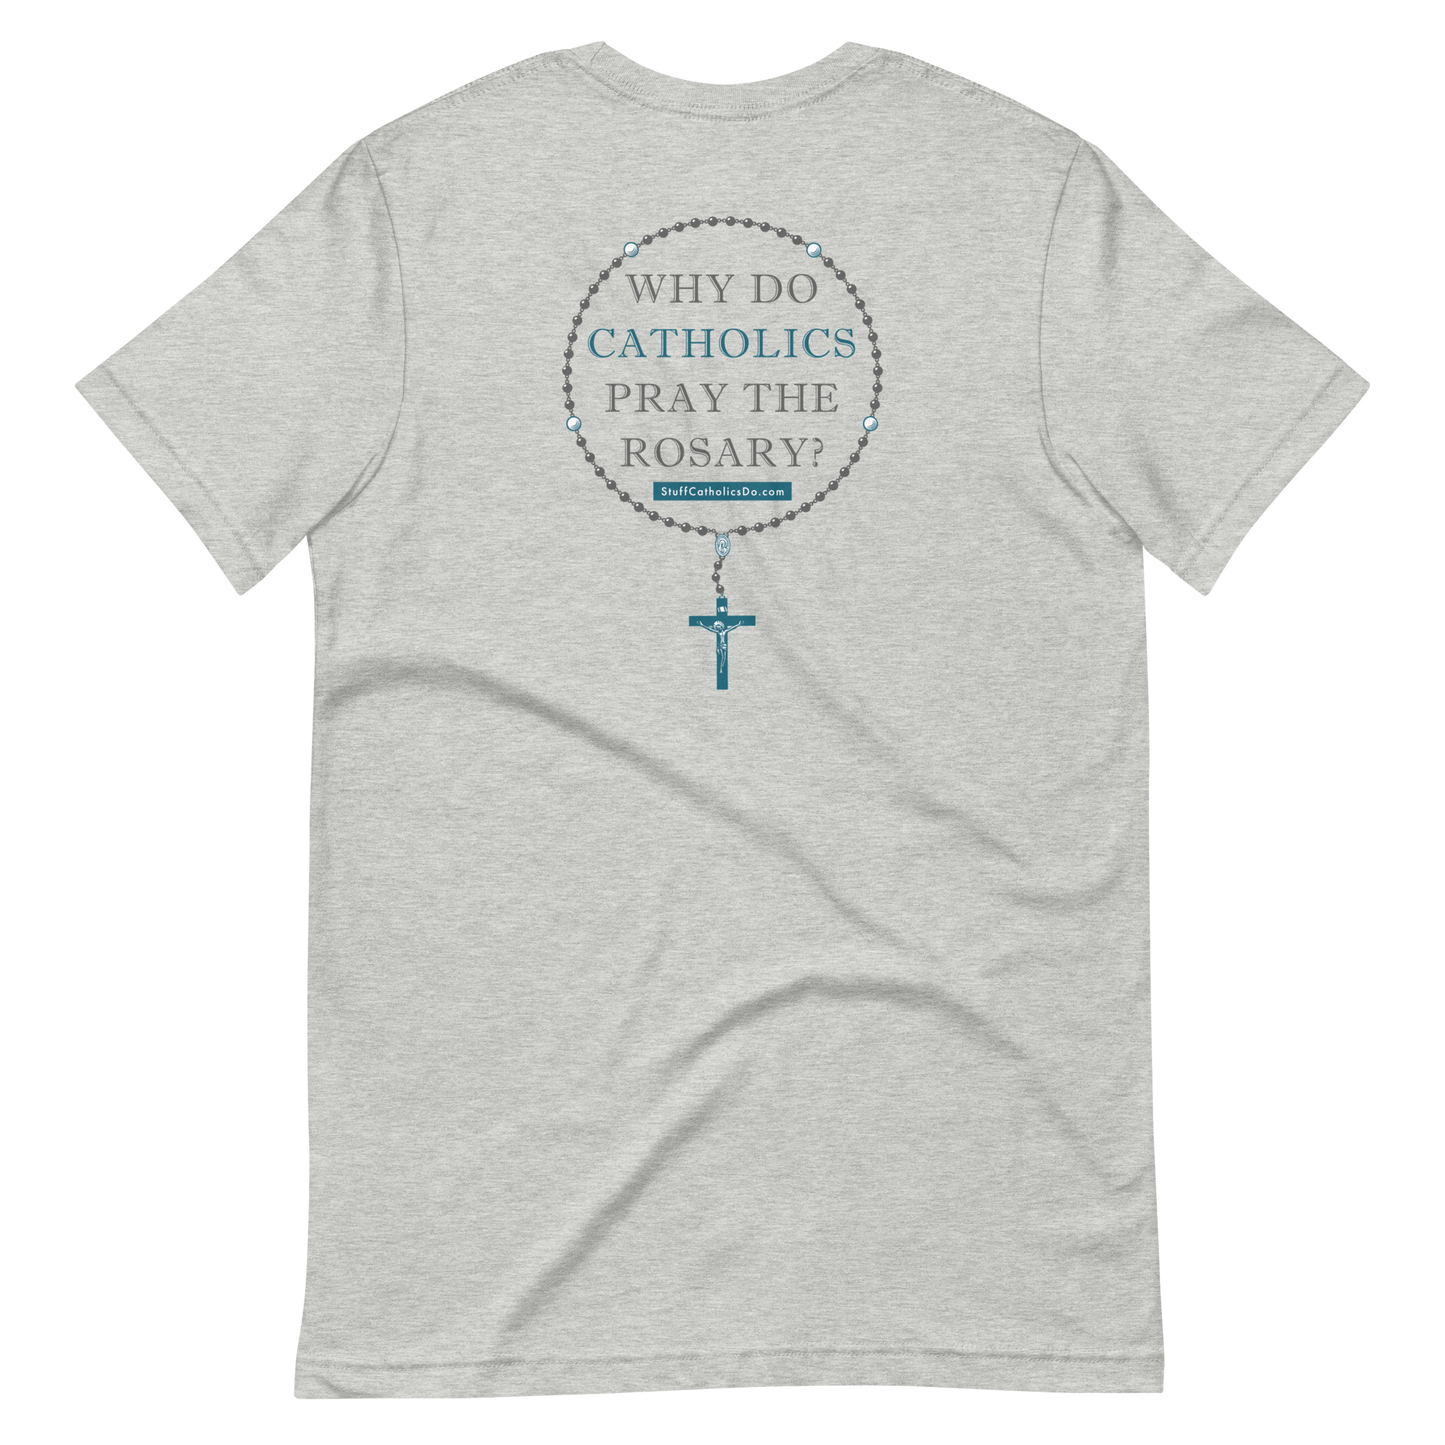 NEW "Why Do Catholics Pray the Rosary?" T-Shirt - Front and Back